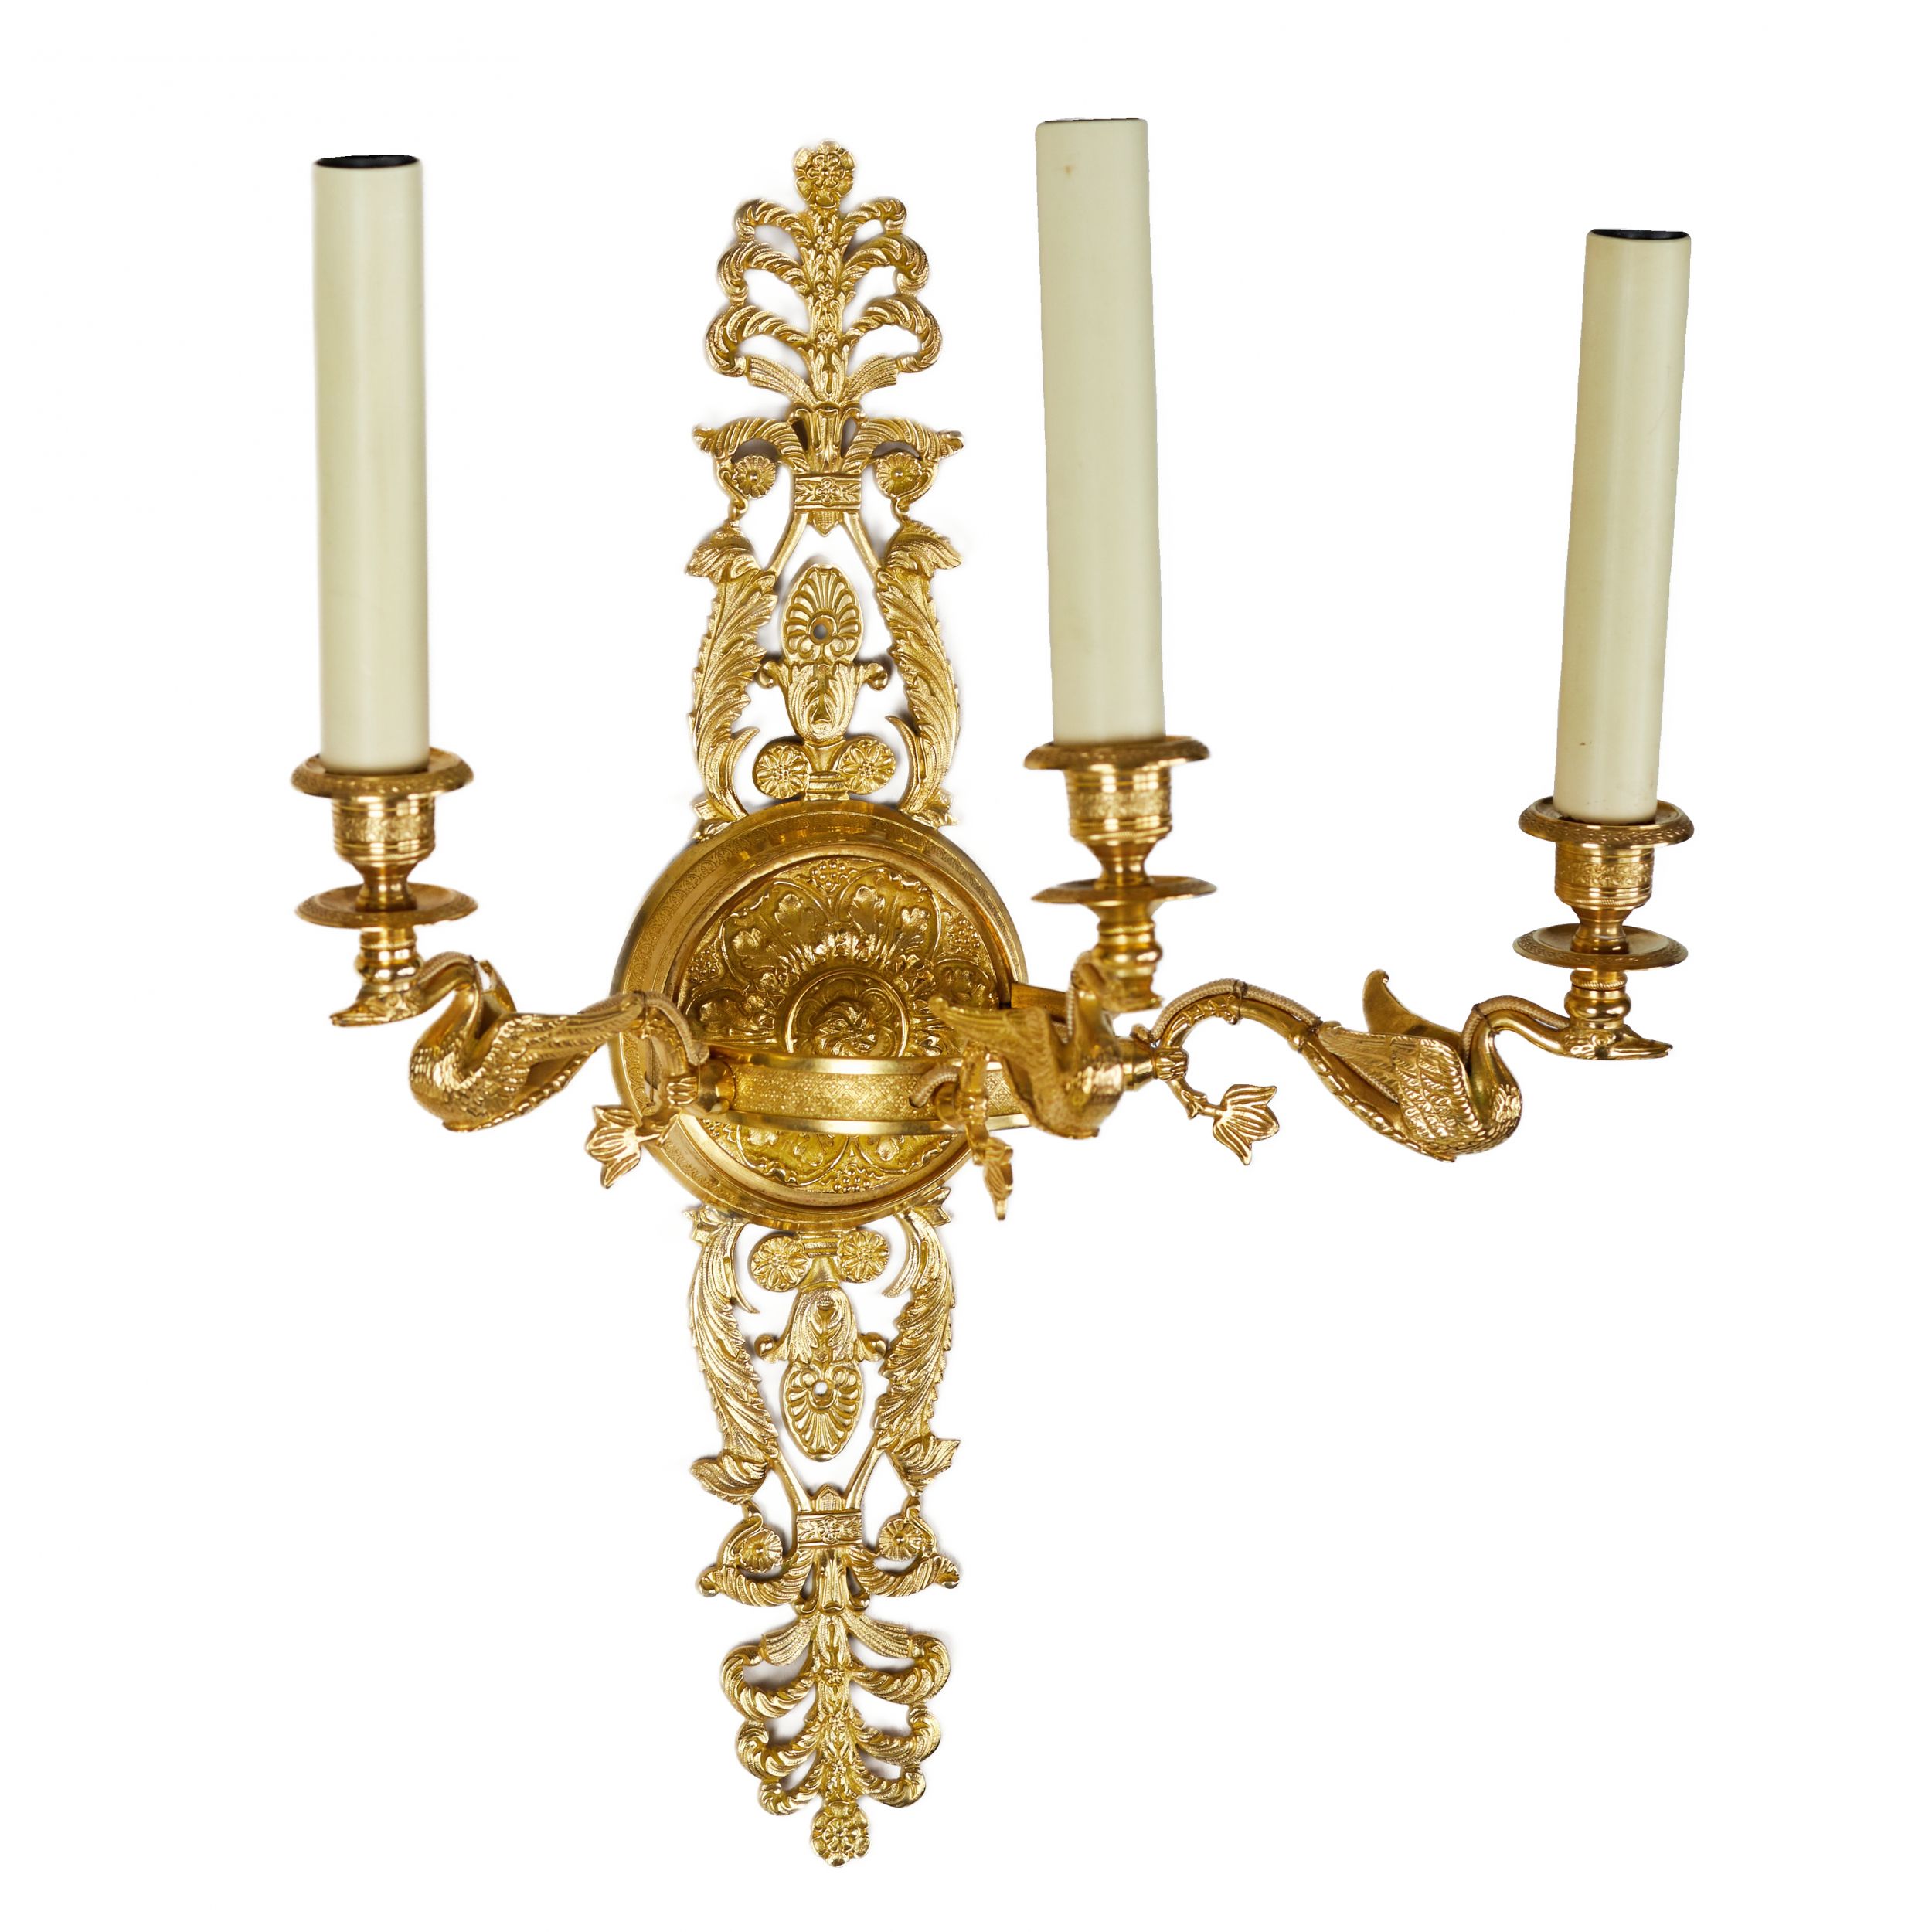 Six gilded bronze wall sconces with a Swan motif. France 20th century - Image 3 of 6